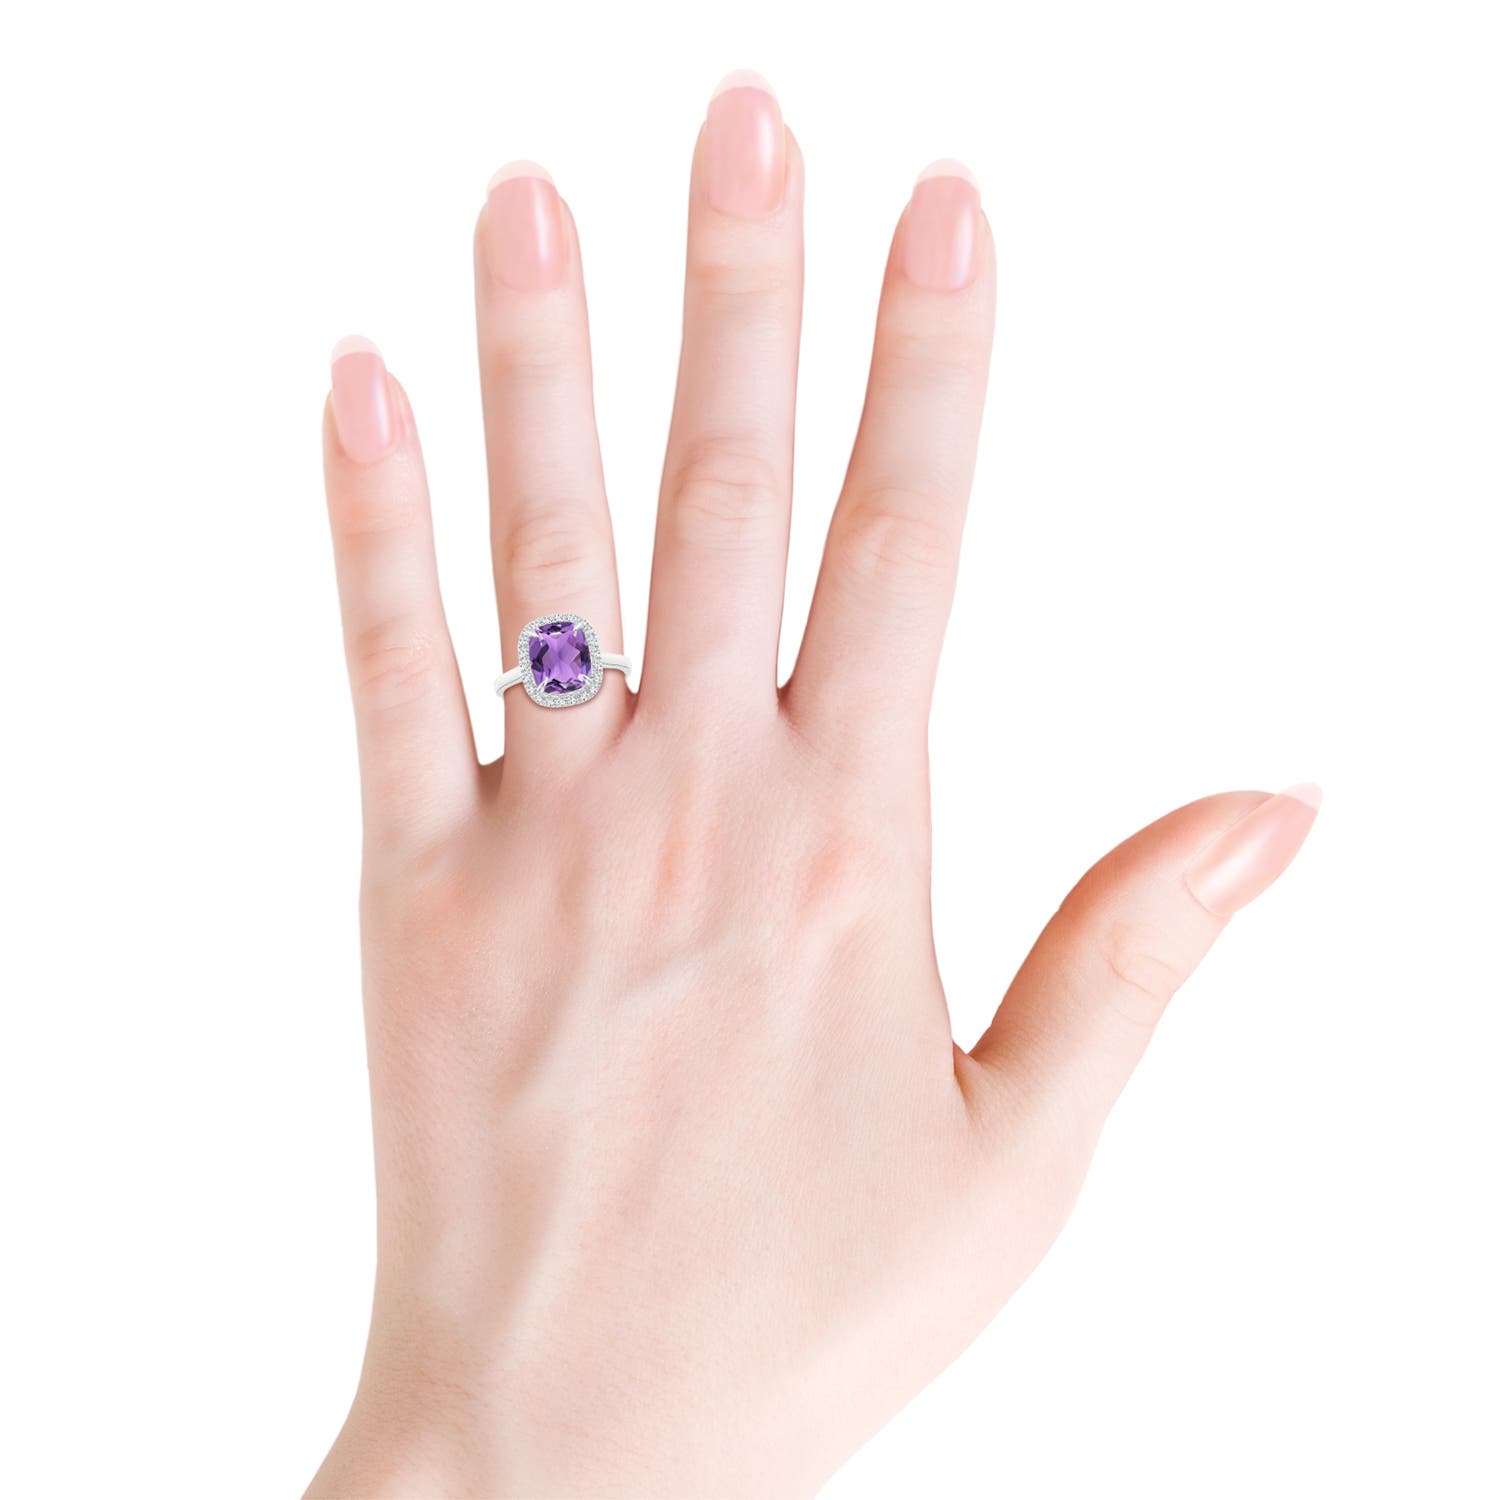 AA - Amethyst / 3.01 CT / 14 KT White Gold